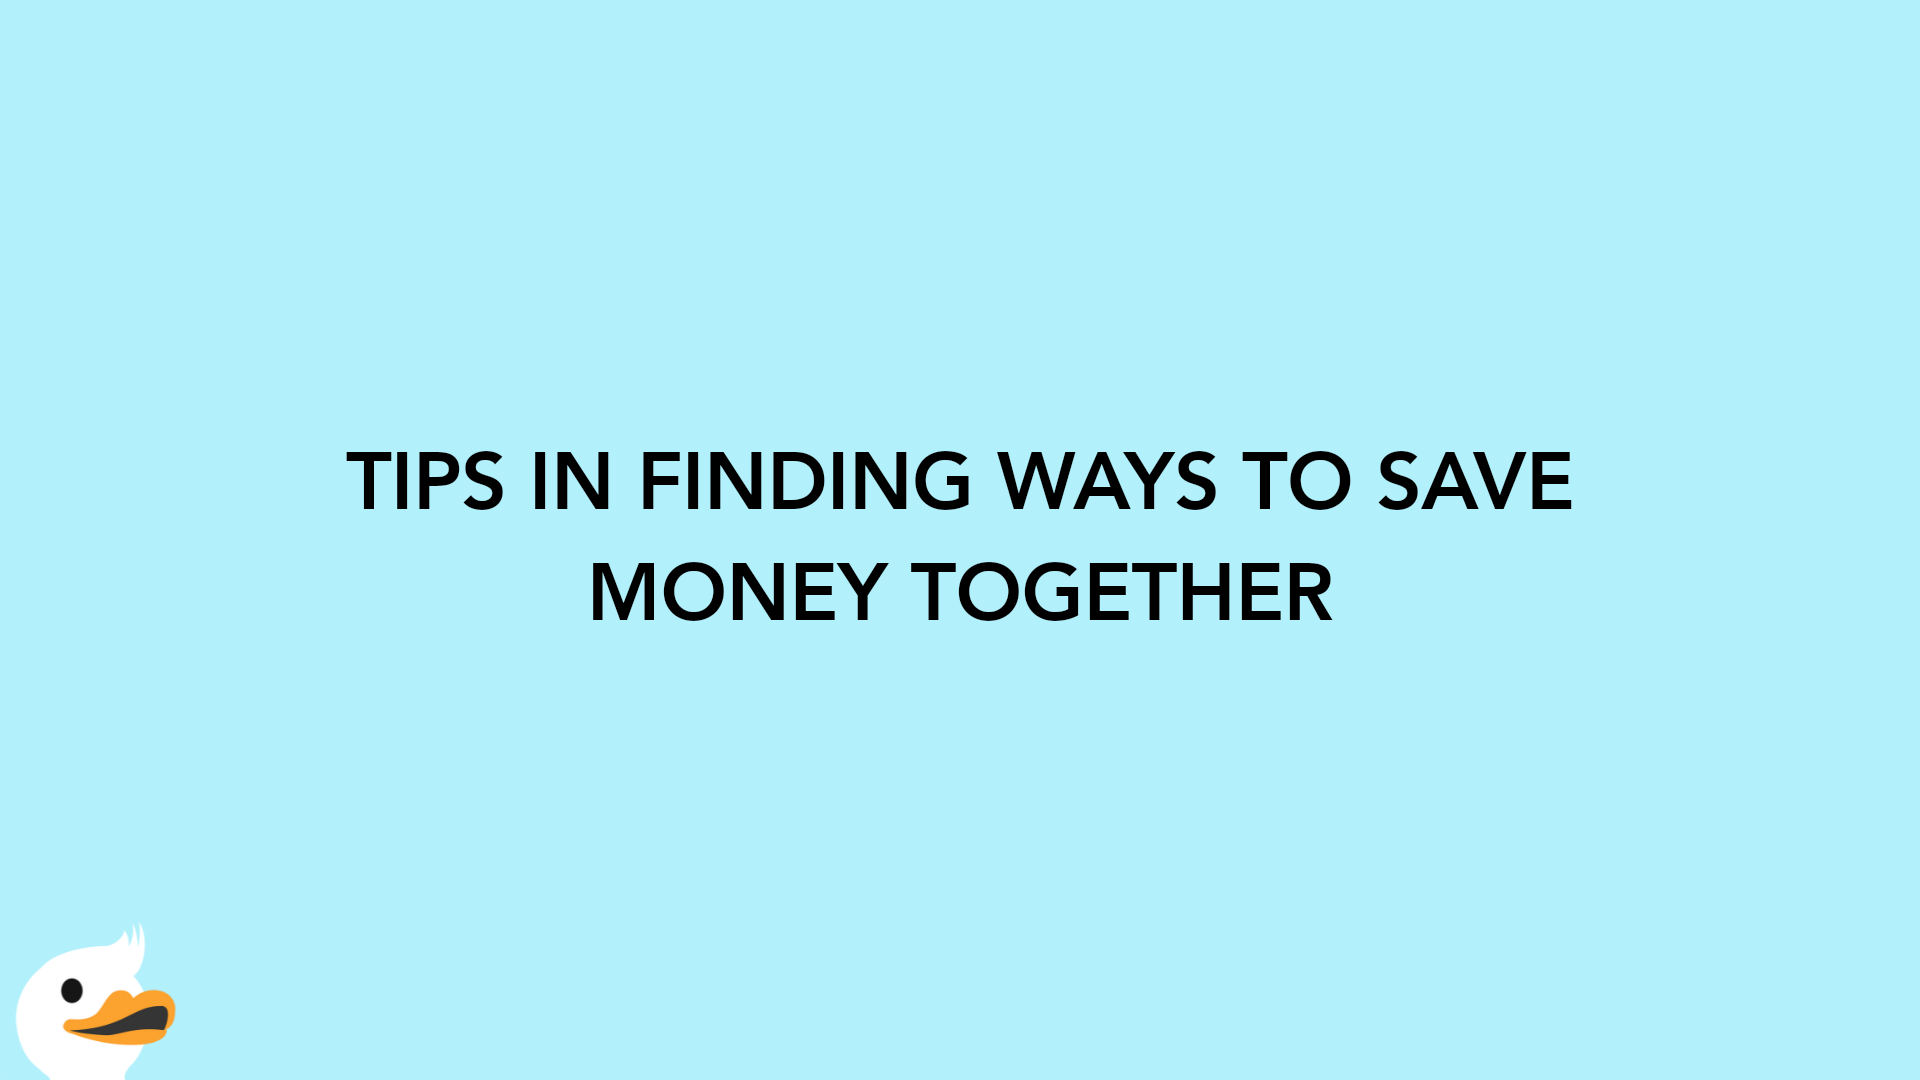 TIPS IN FINDING WAYS TO SAVE MONEY TOGETHER